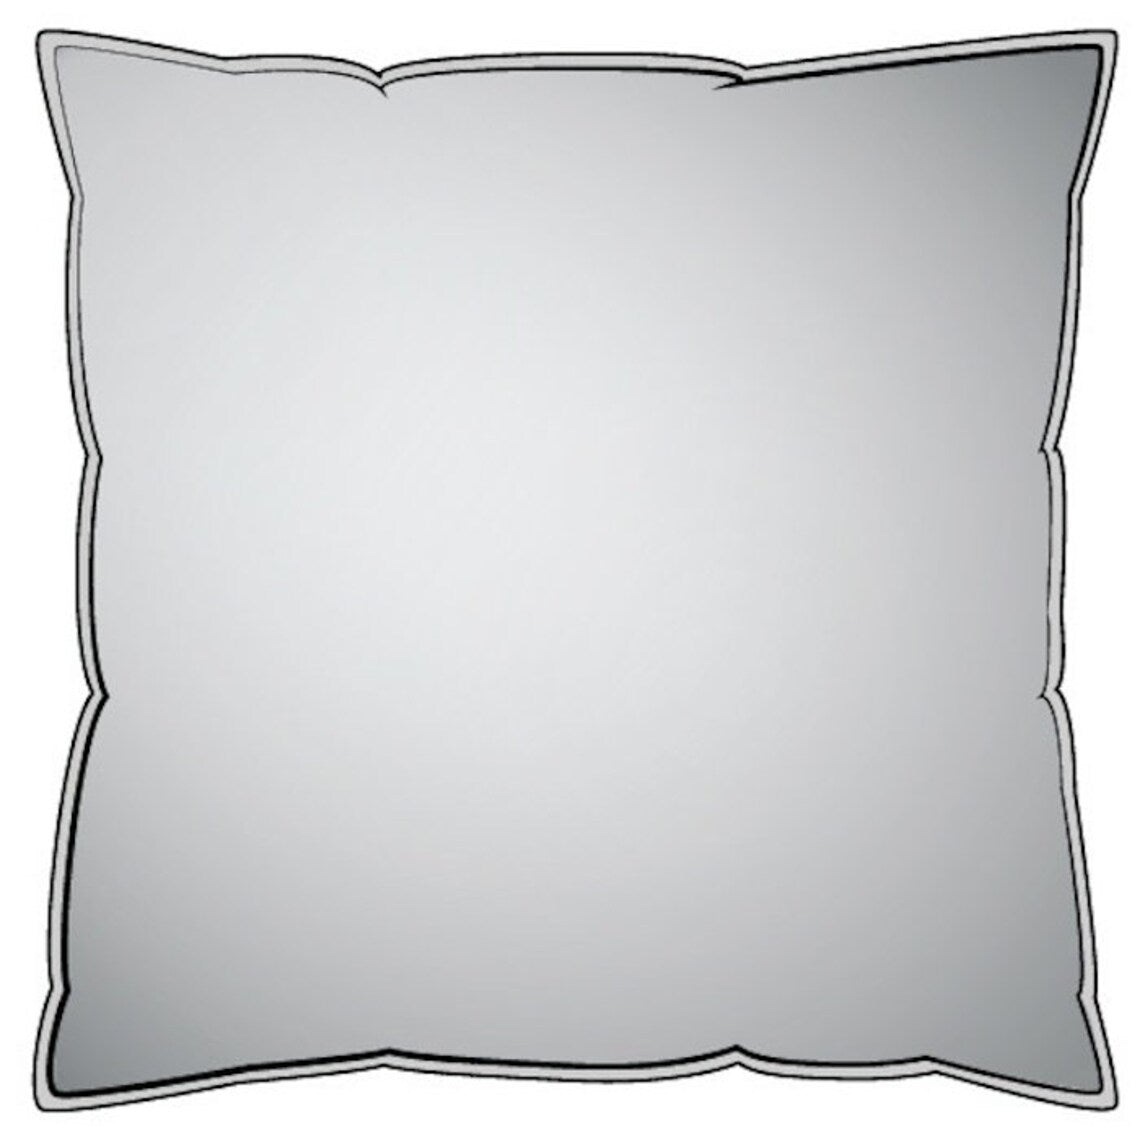 Decorative Pillows in Ecru Large Gingham Check on White